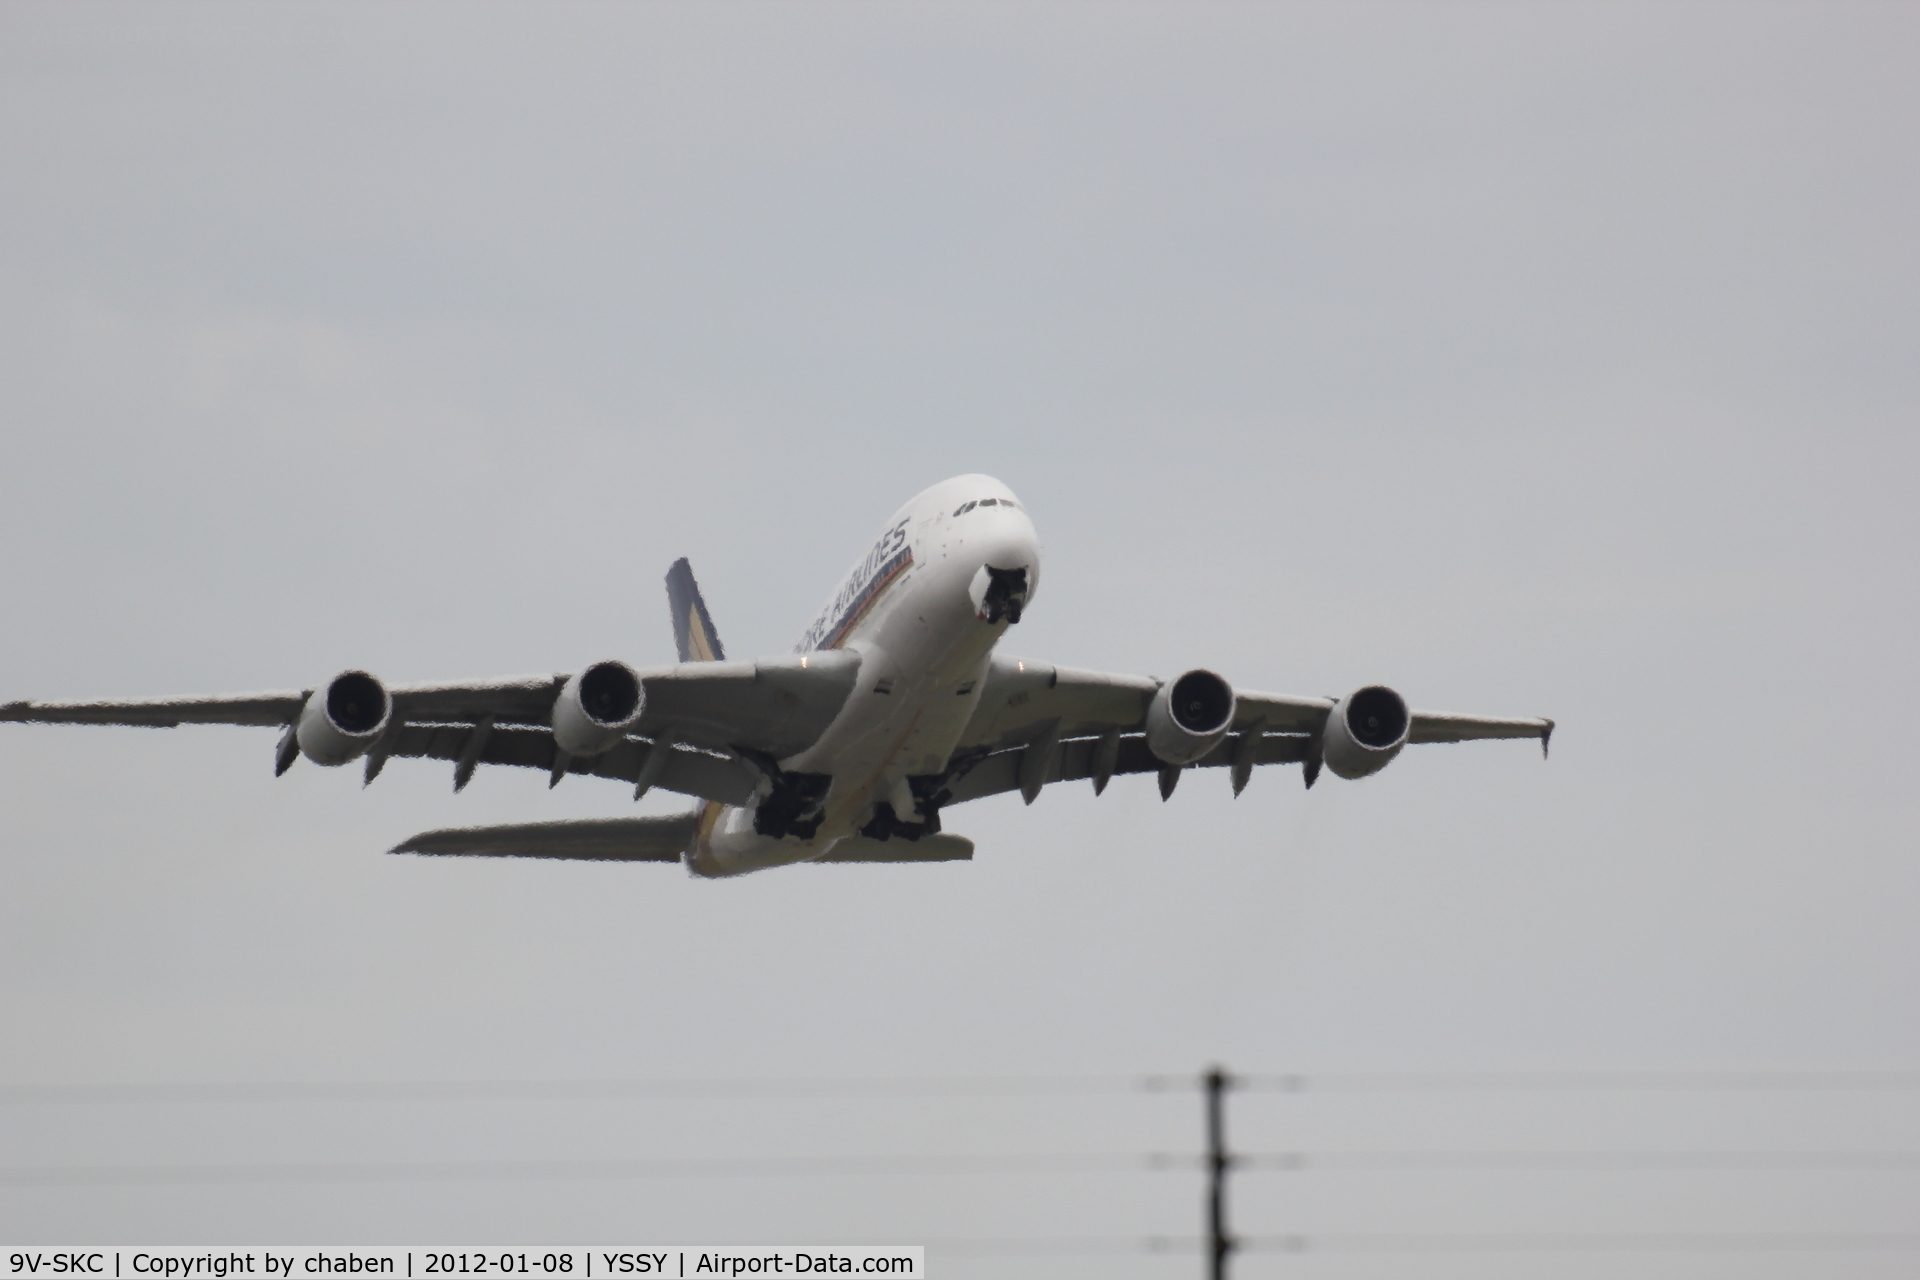 9V-SKC, 2006 Airbus A380-841 C/N 006, Taking off at Sydney International Airport